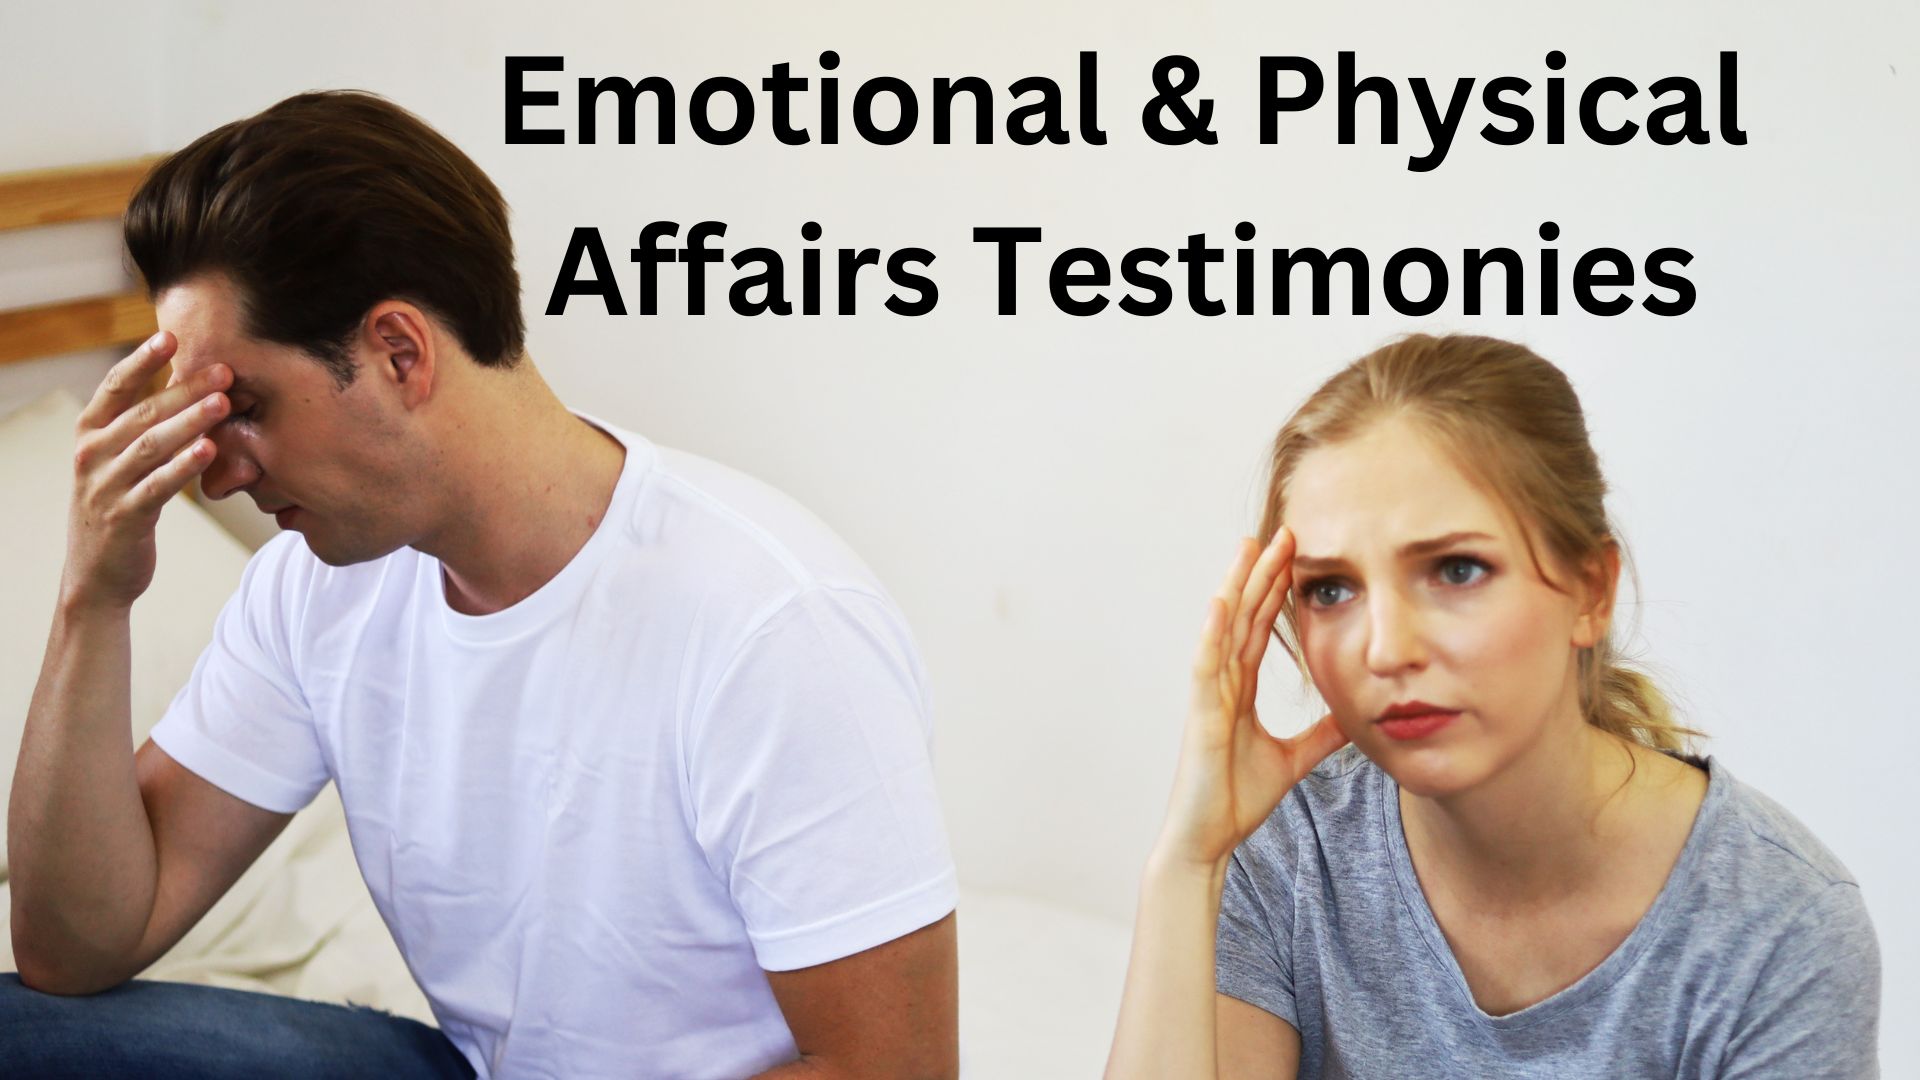 Emotional and Physical Affairs Testimonies - Adobe Stock